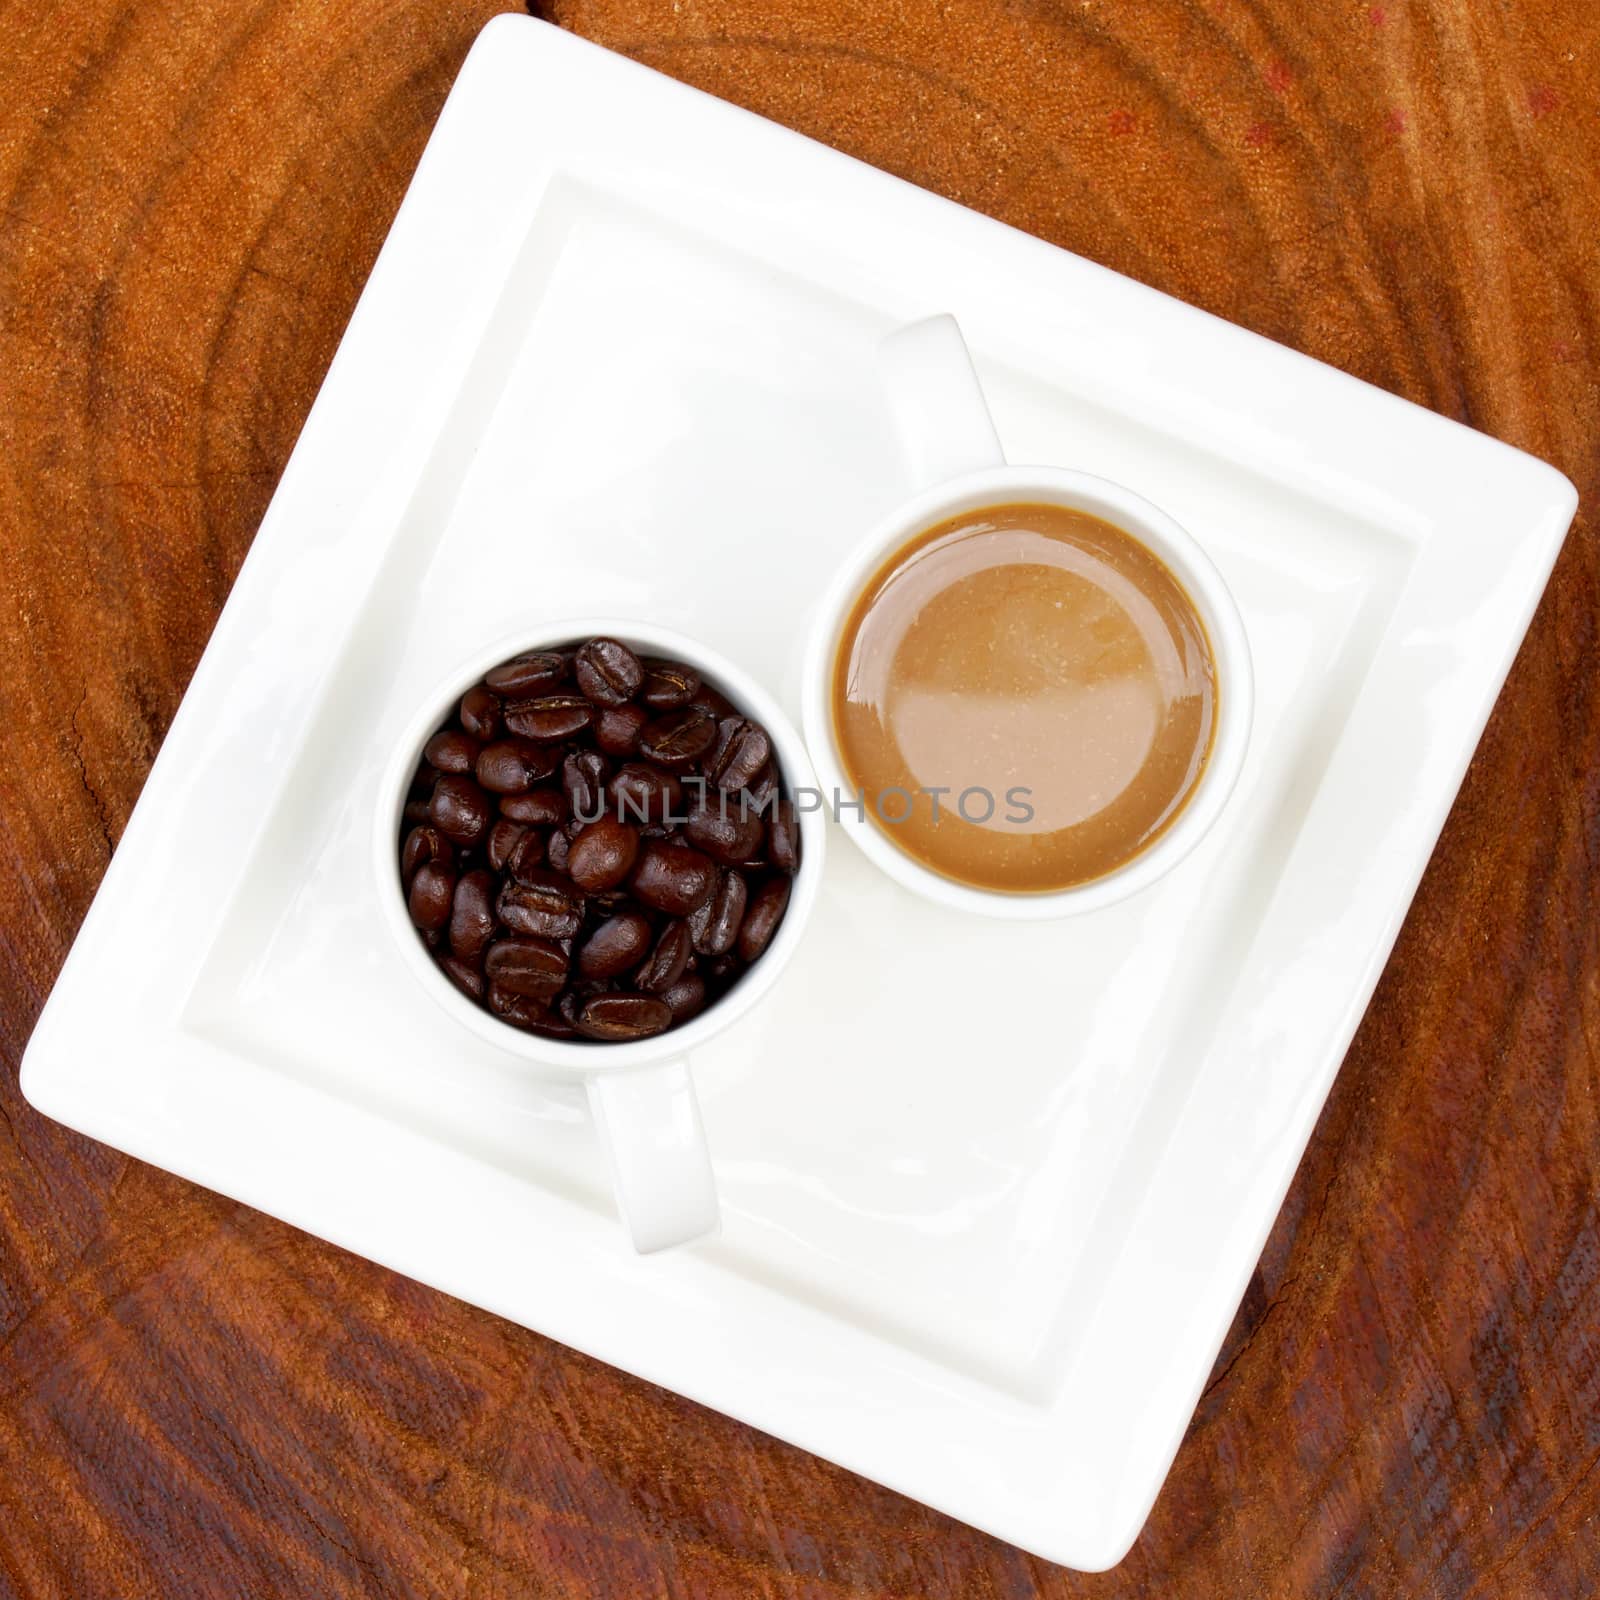 Coffee and beans on the wooden background.